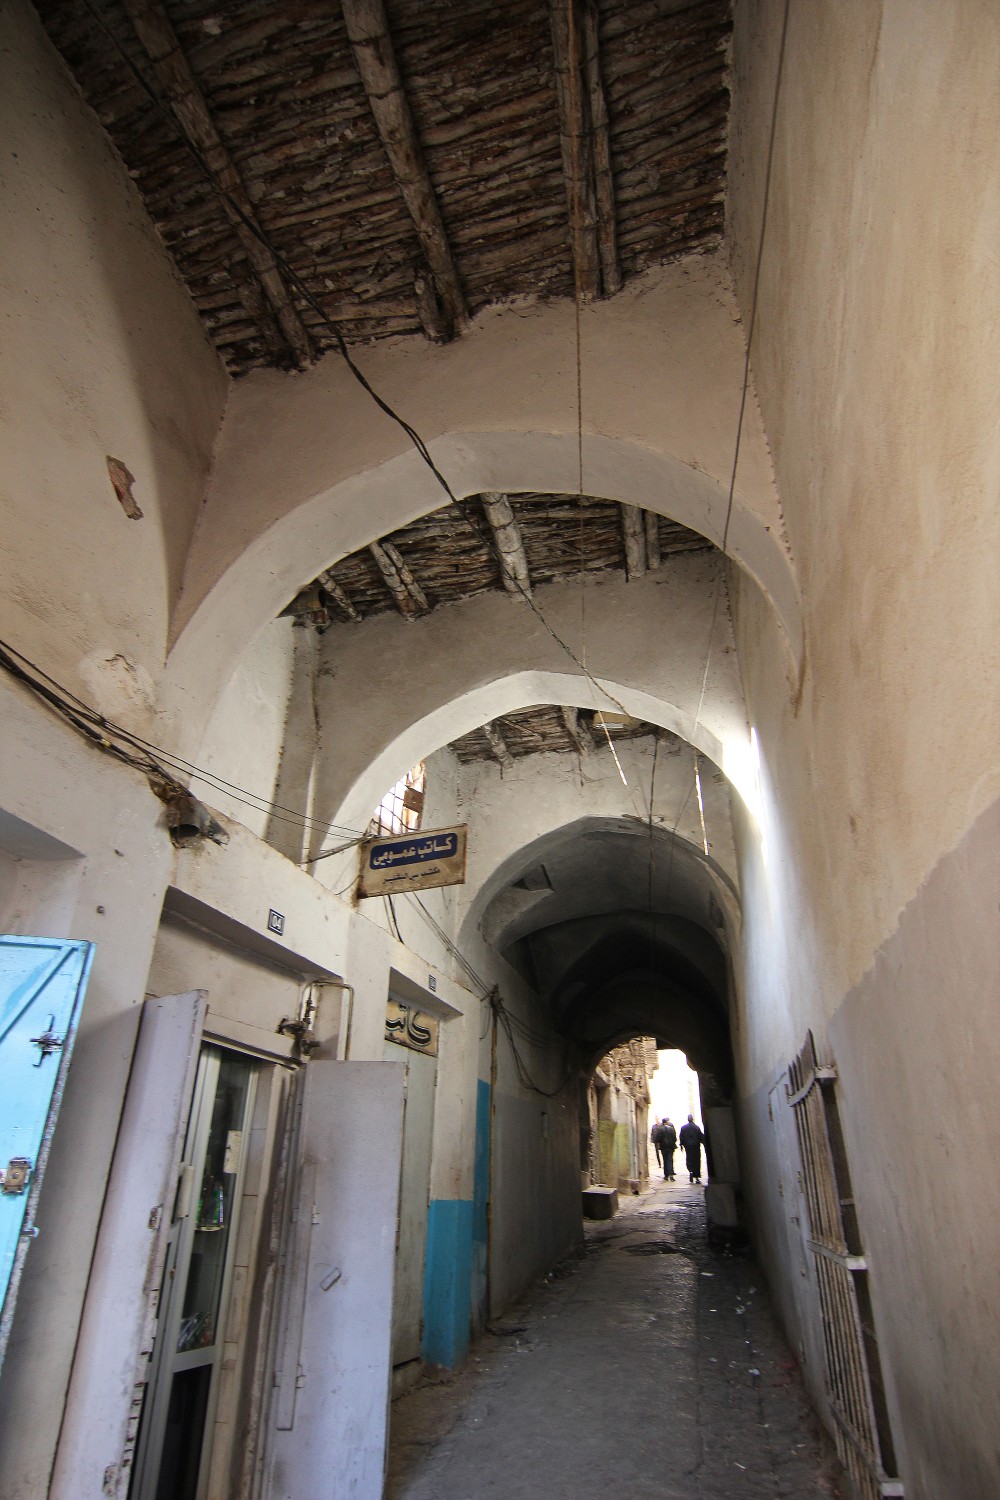 Rue Sellahi Tahar, view of narrow covered street showing pointed arches and wooden ceiling with log structure